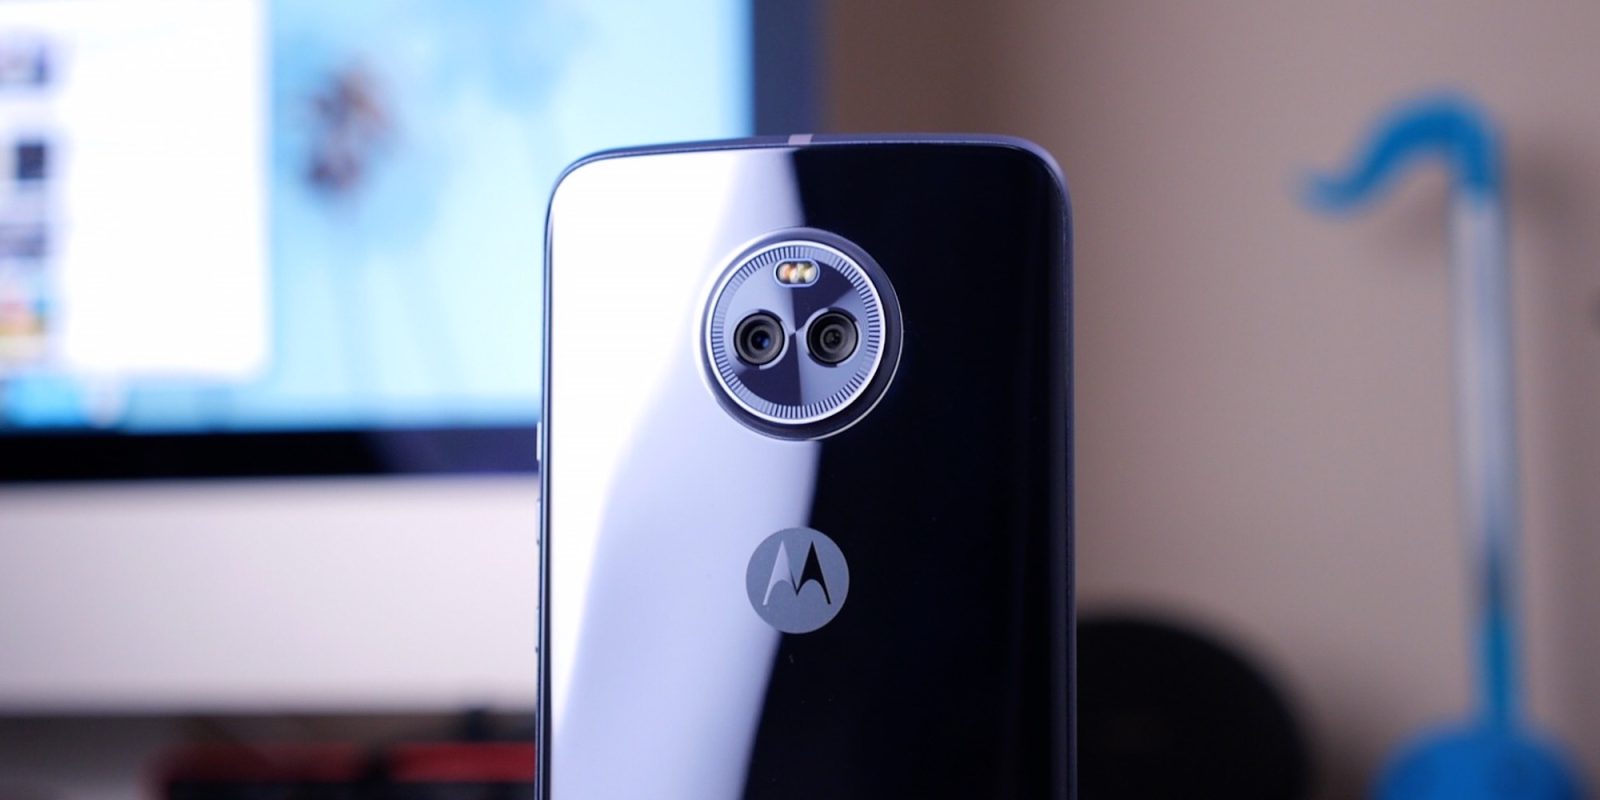 Moto X4 Android One gets upgrade to Android 8.0 Oreo